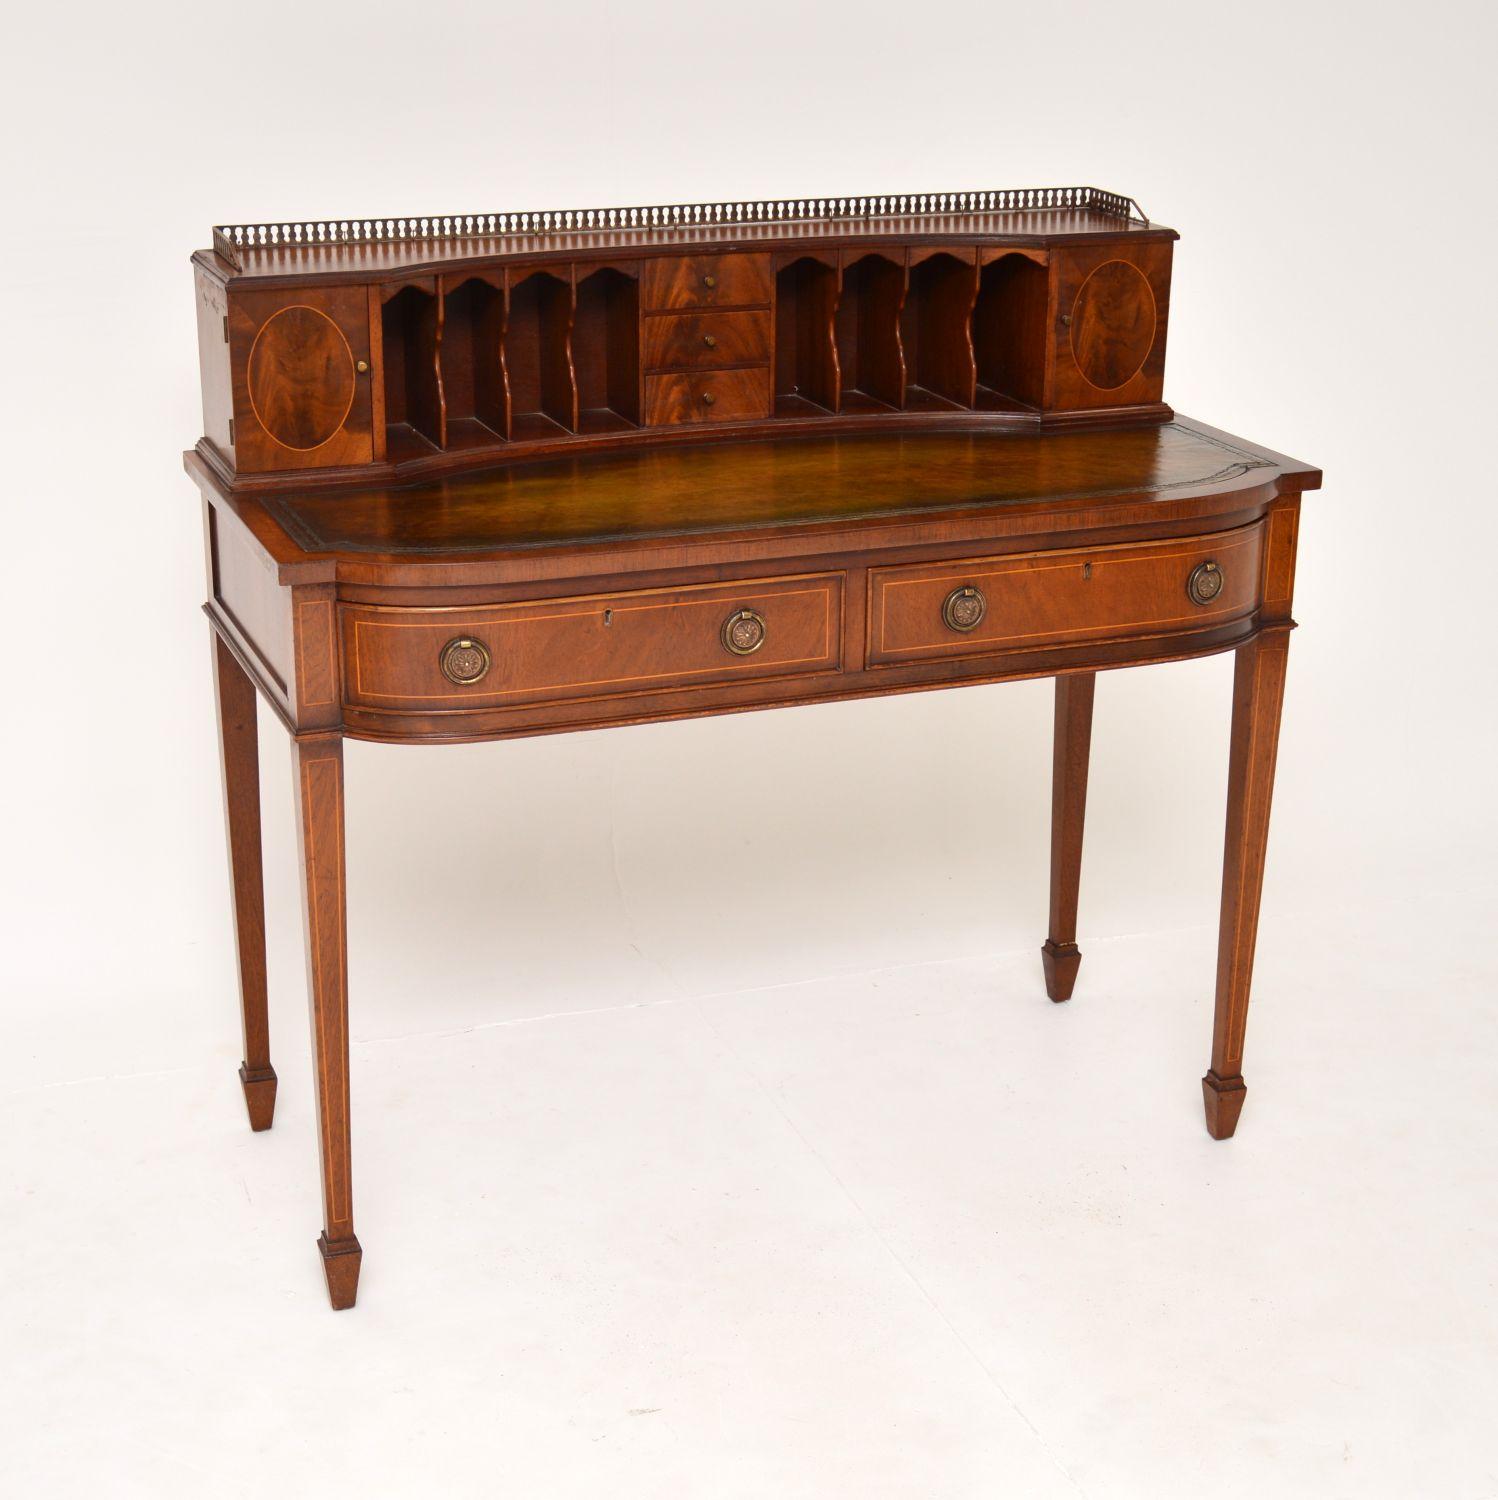 A lovely antique Sheraton Style bonheur du jour writing table in wood. This was made in England, it dates from around the 1930’s.

It is of fantastic quality and is beautifully made. The wood has satin wood inlay around all the edges, this has